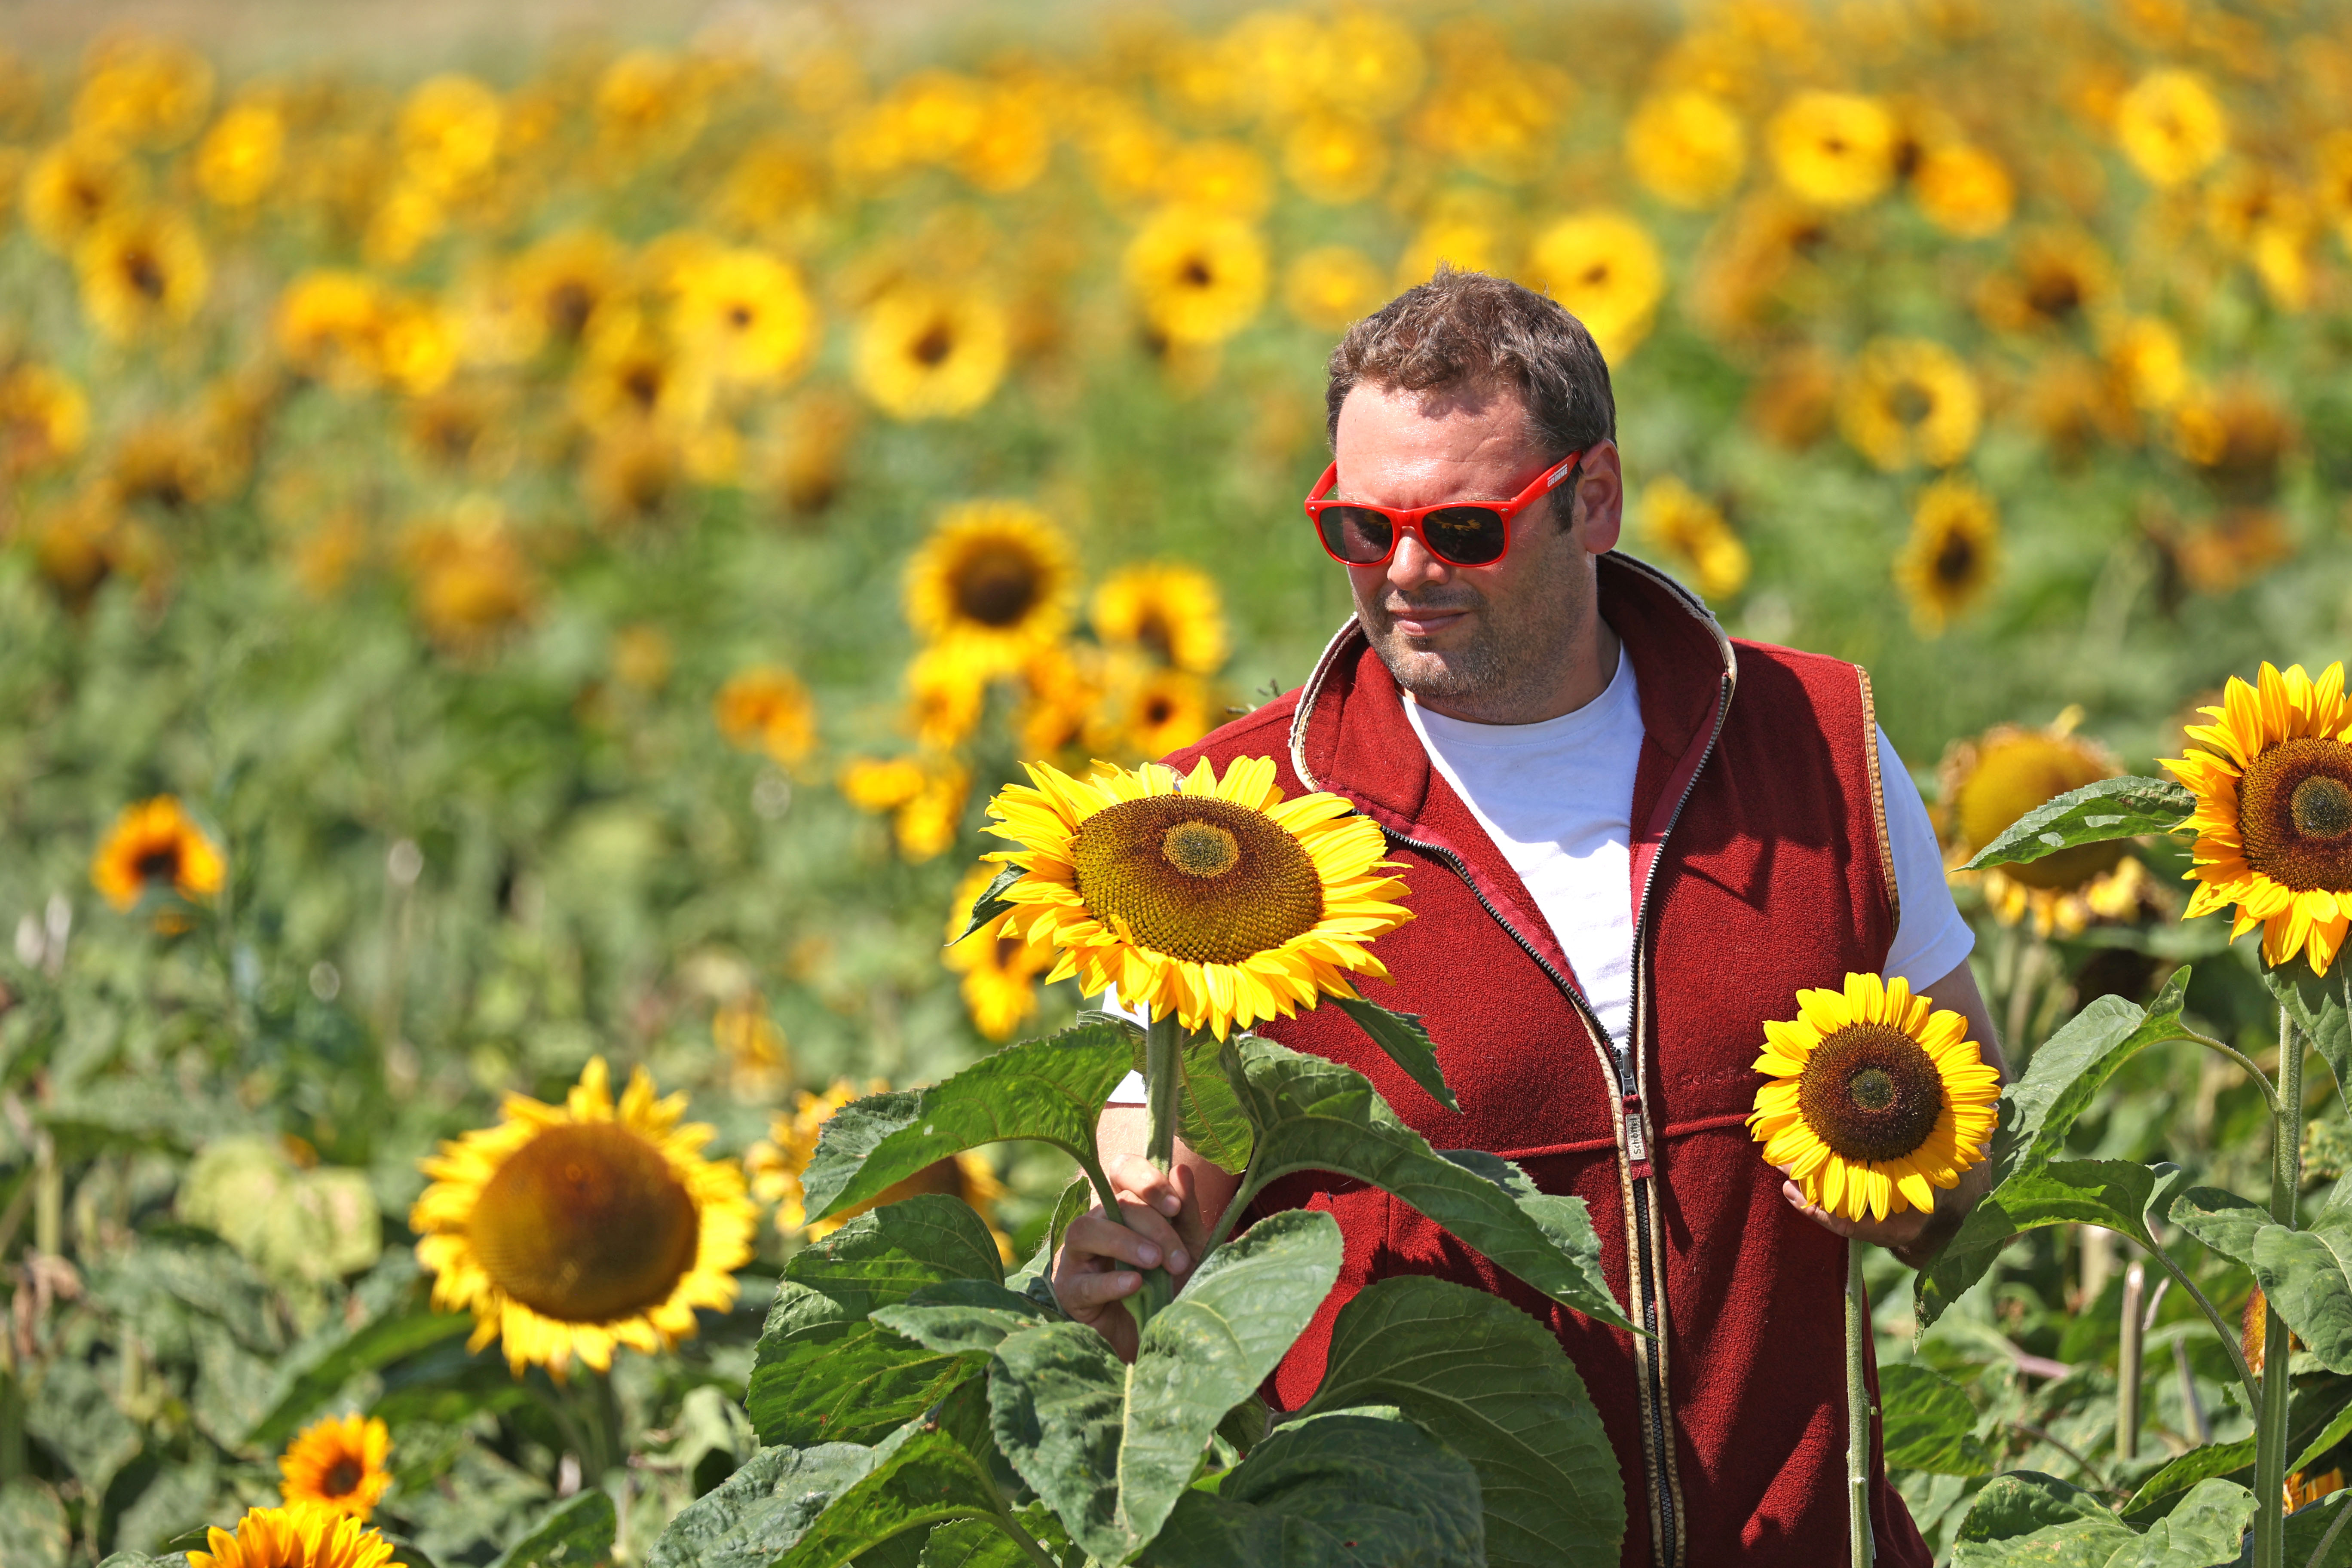 Sunflower grower James Lacey of L&D Flowers, inspects one of his fields of sunflowers near Spalding, Lincolnshire, UK. (Paul Marriott/ PA)